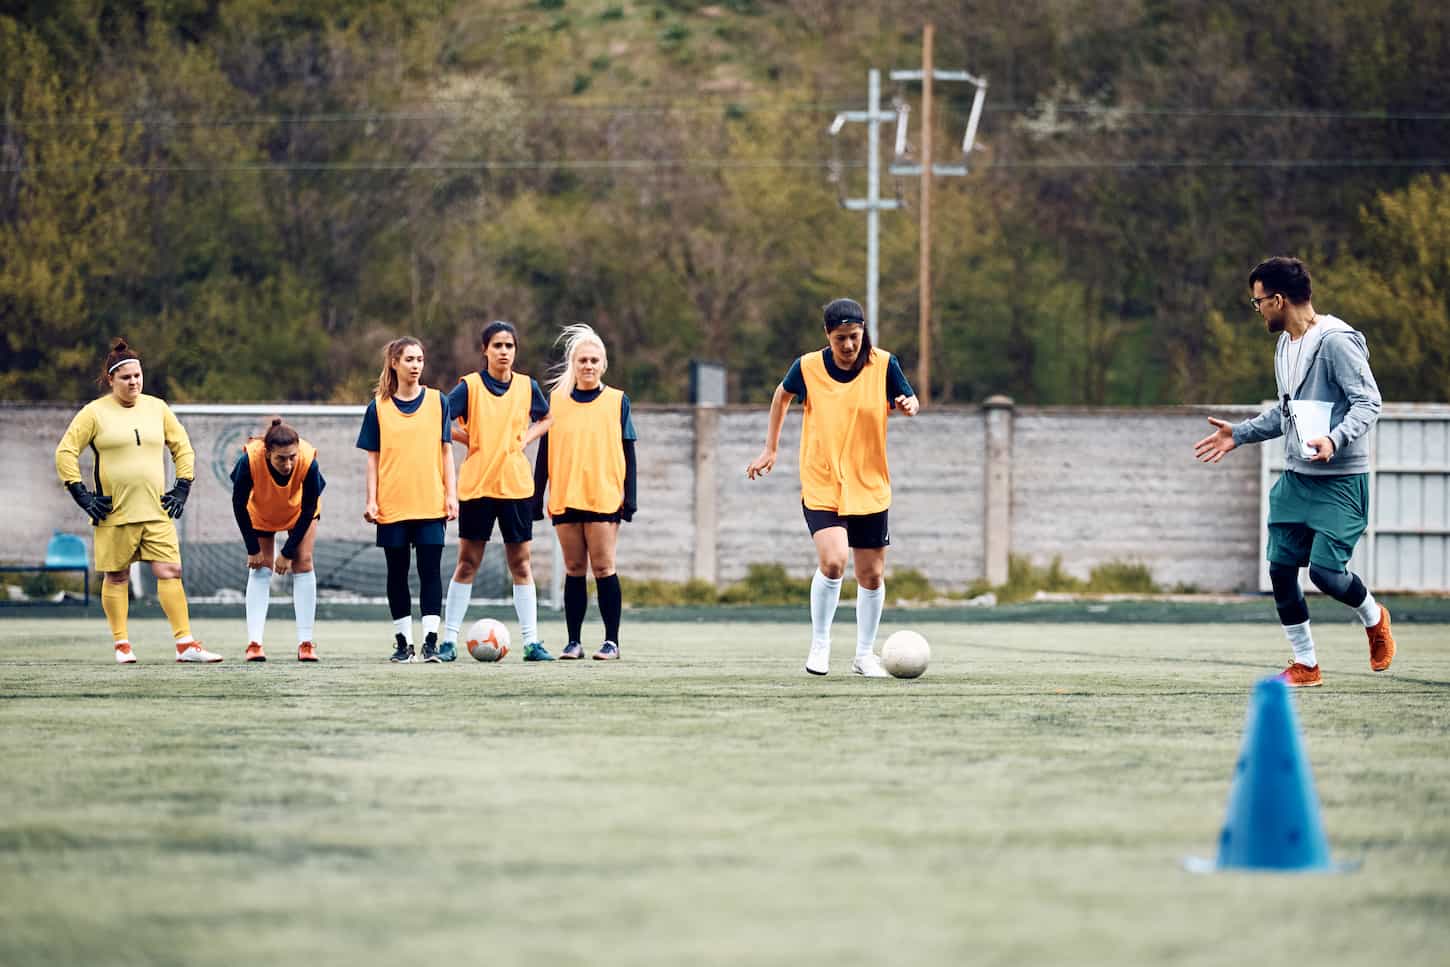 An image of a Soccer coach and female players during sports training on the playing field.